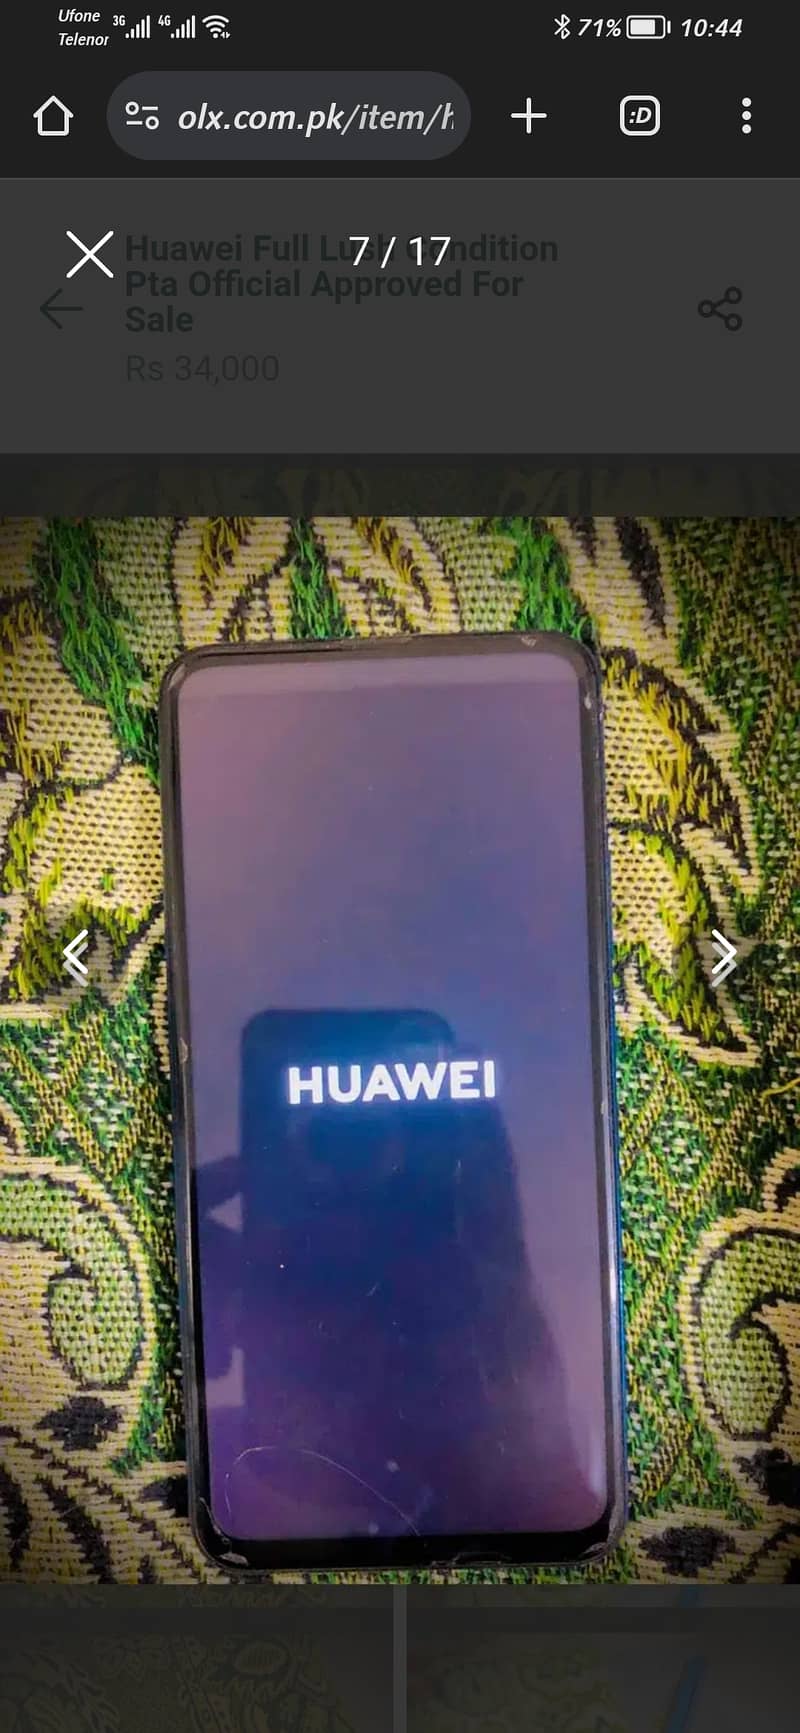 Huawei full lush condition pta official approved for sale 03405247206 7